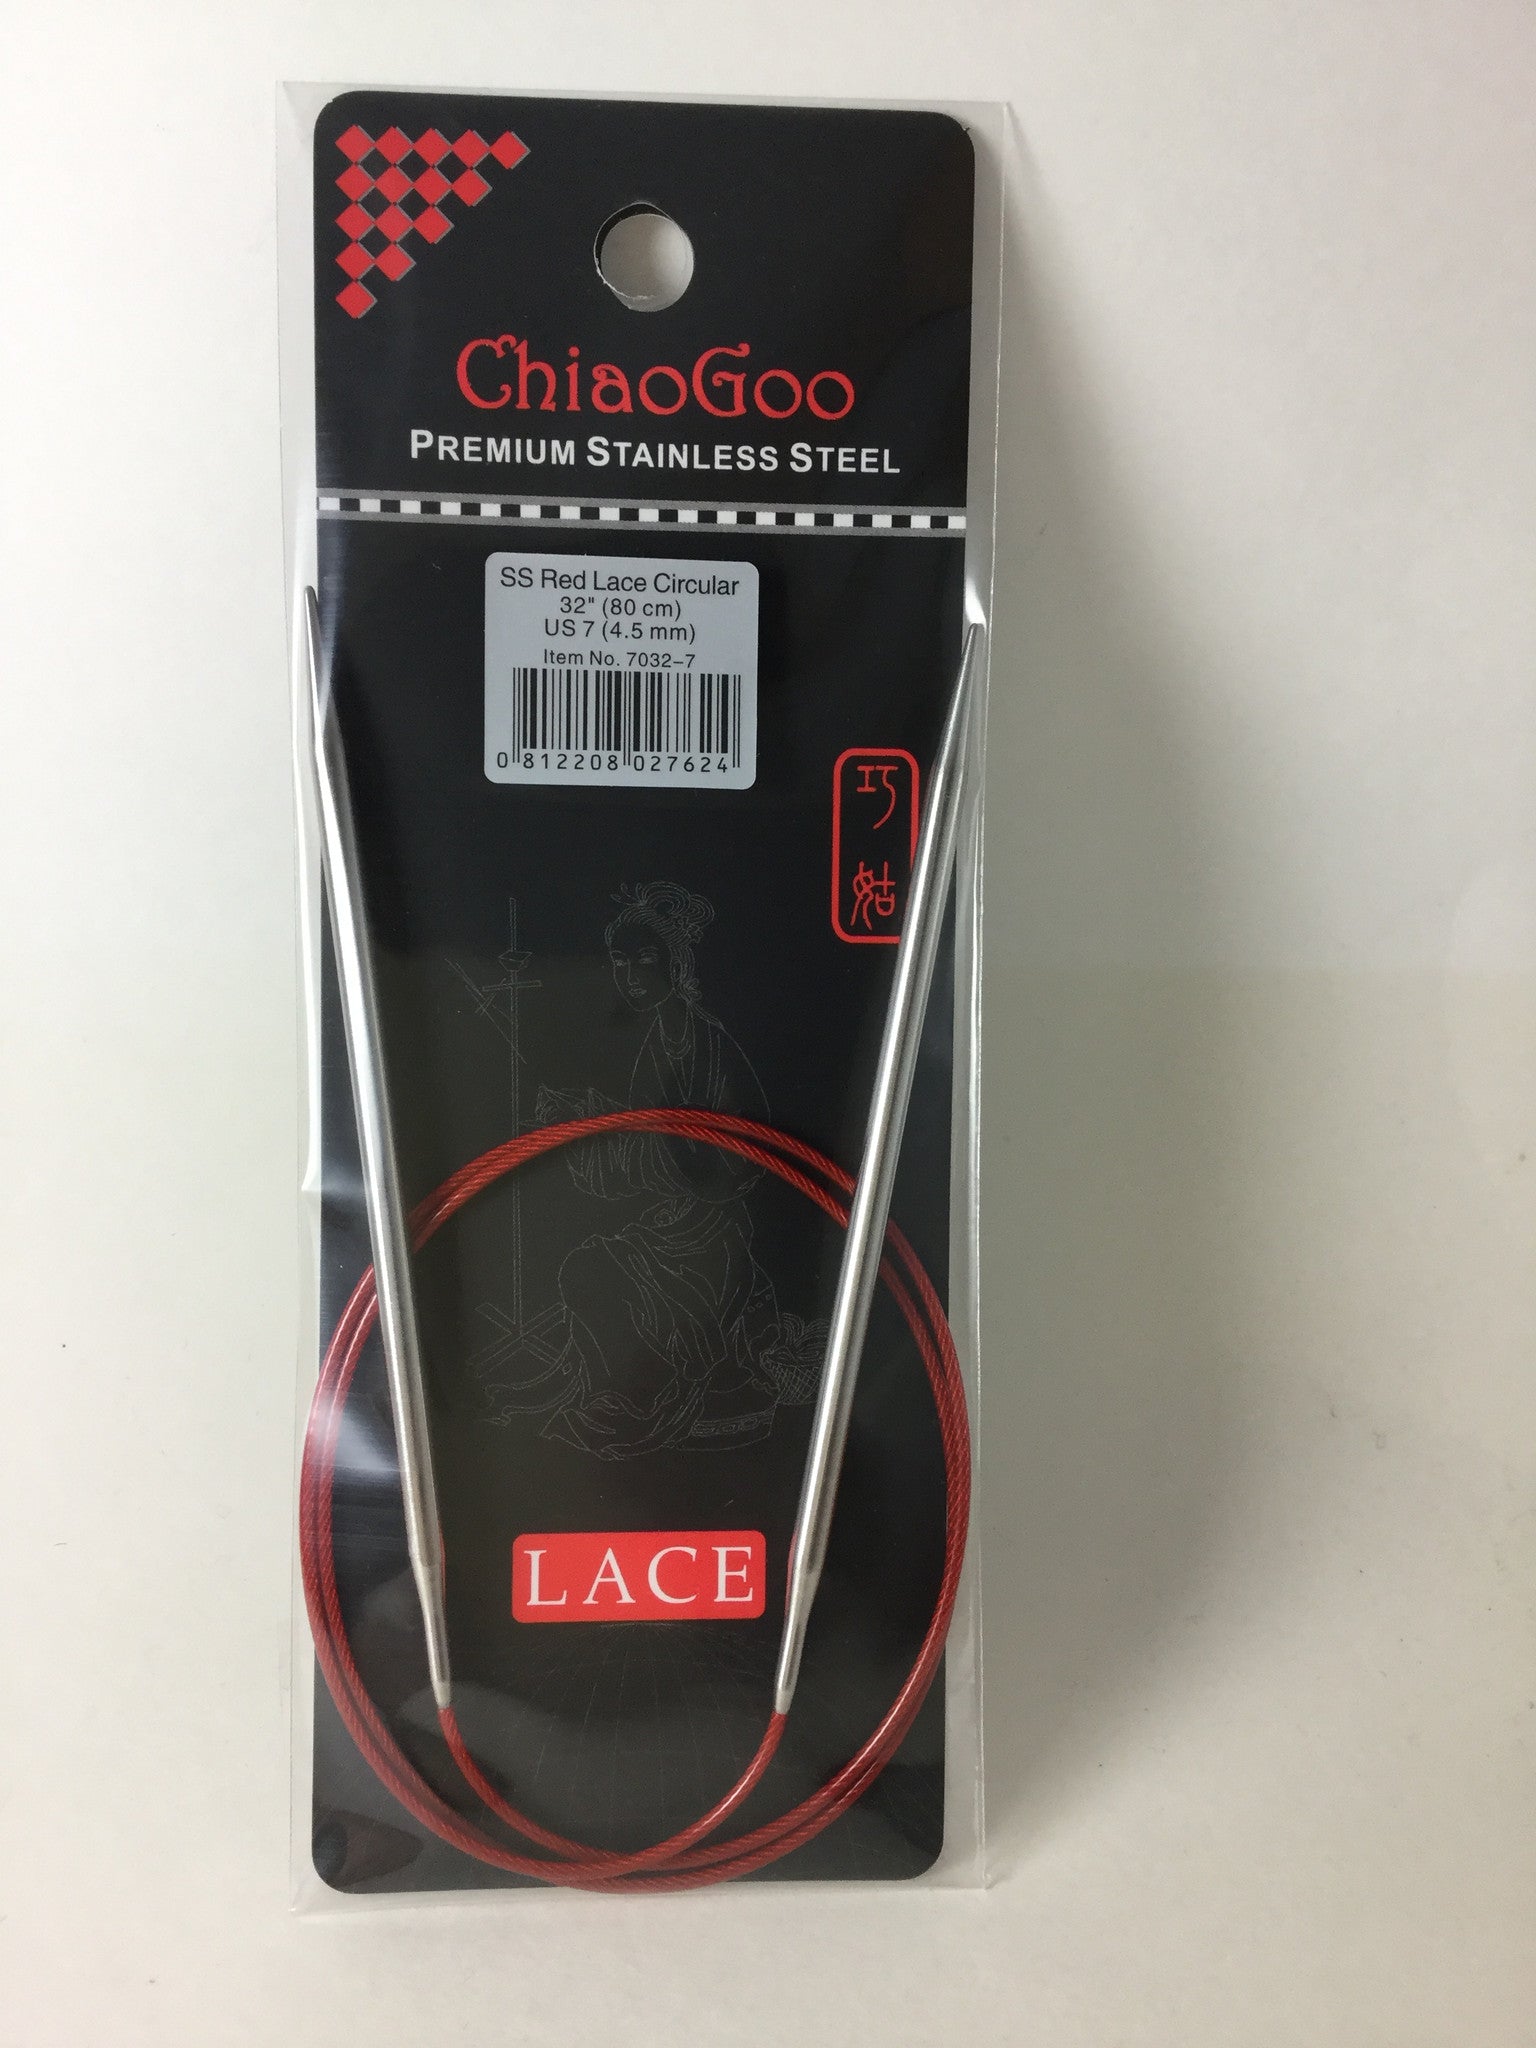 32-inch lace tip circular needles from ChiaoGoo